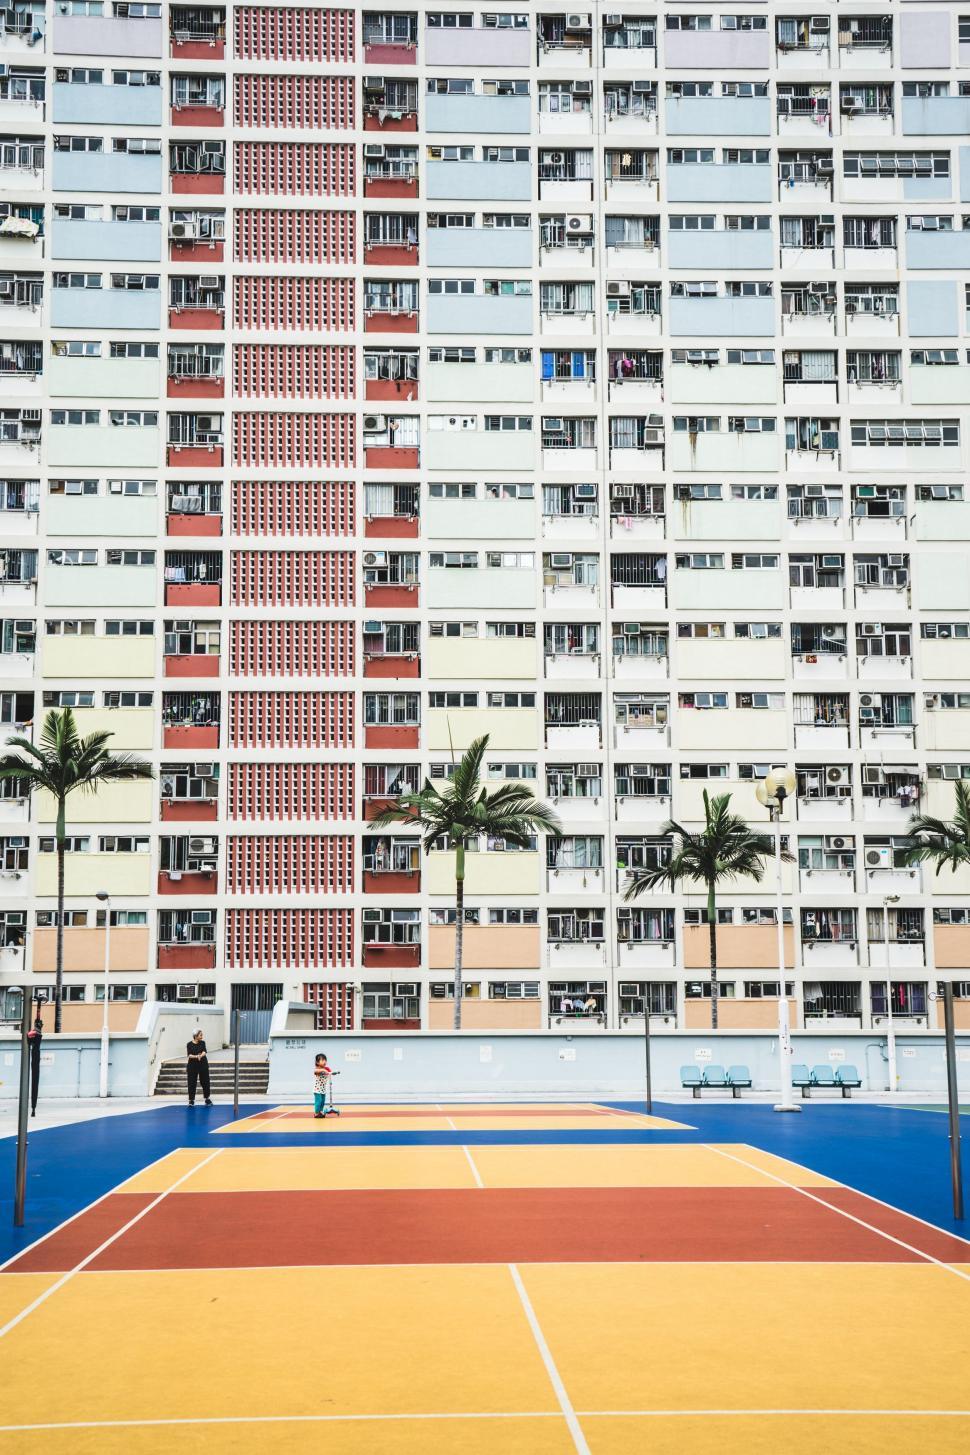 Free Image of Tennis Court in Front of Tall Building 